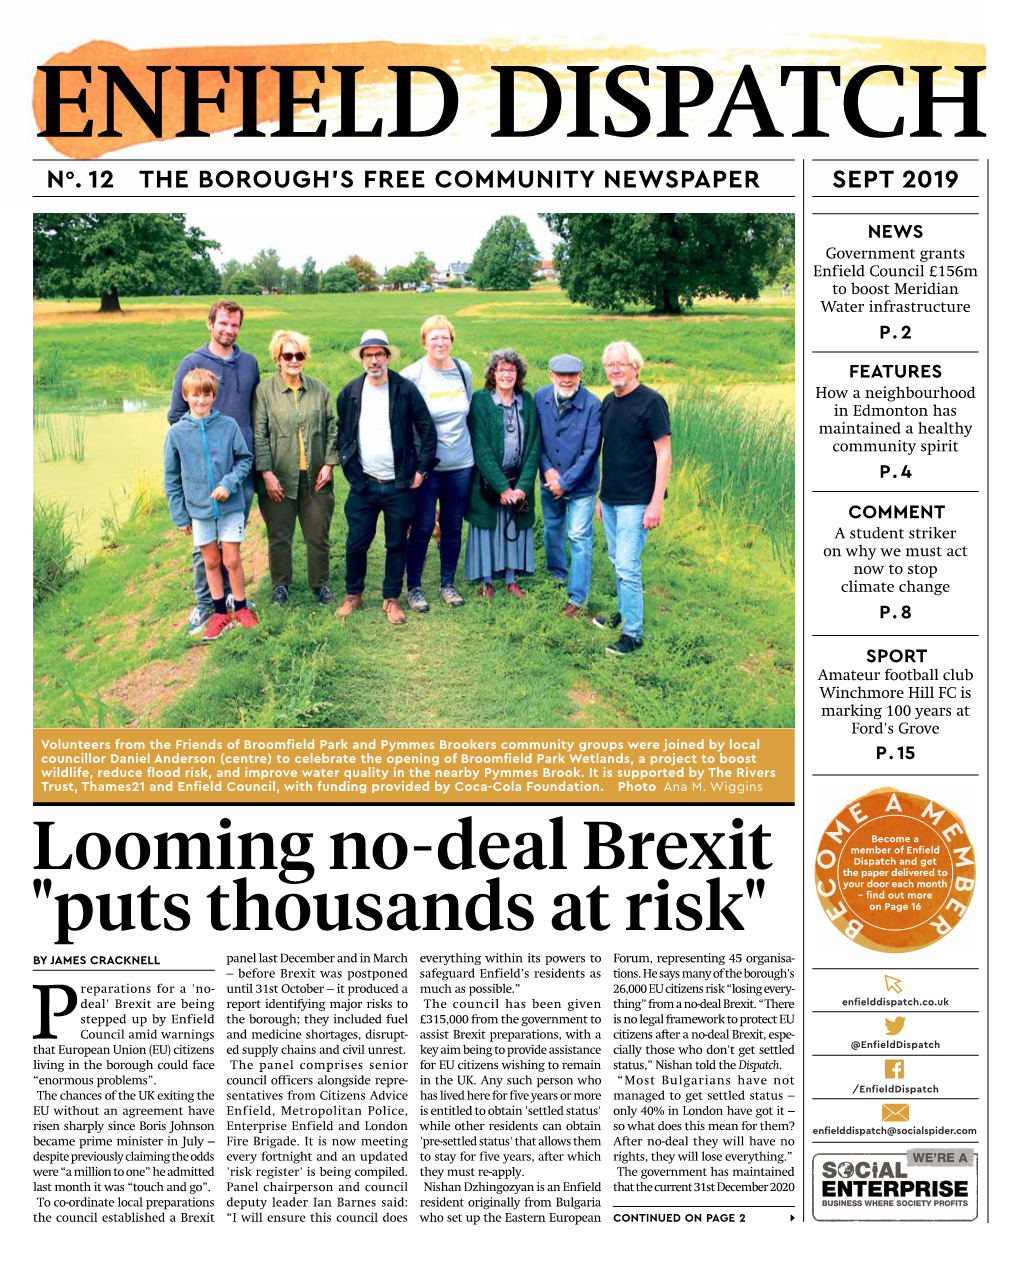 Looming No-Deal Brexit "Puts Thousands at Risk"